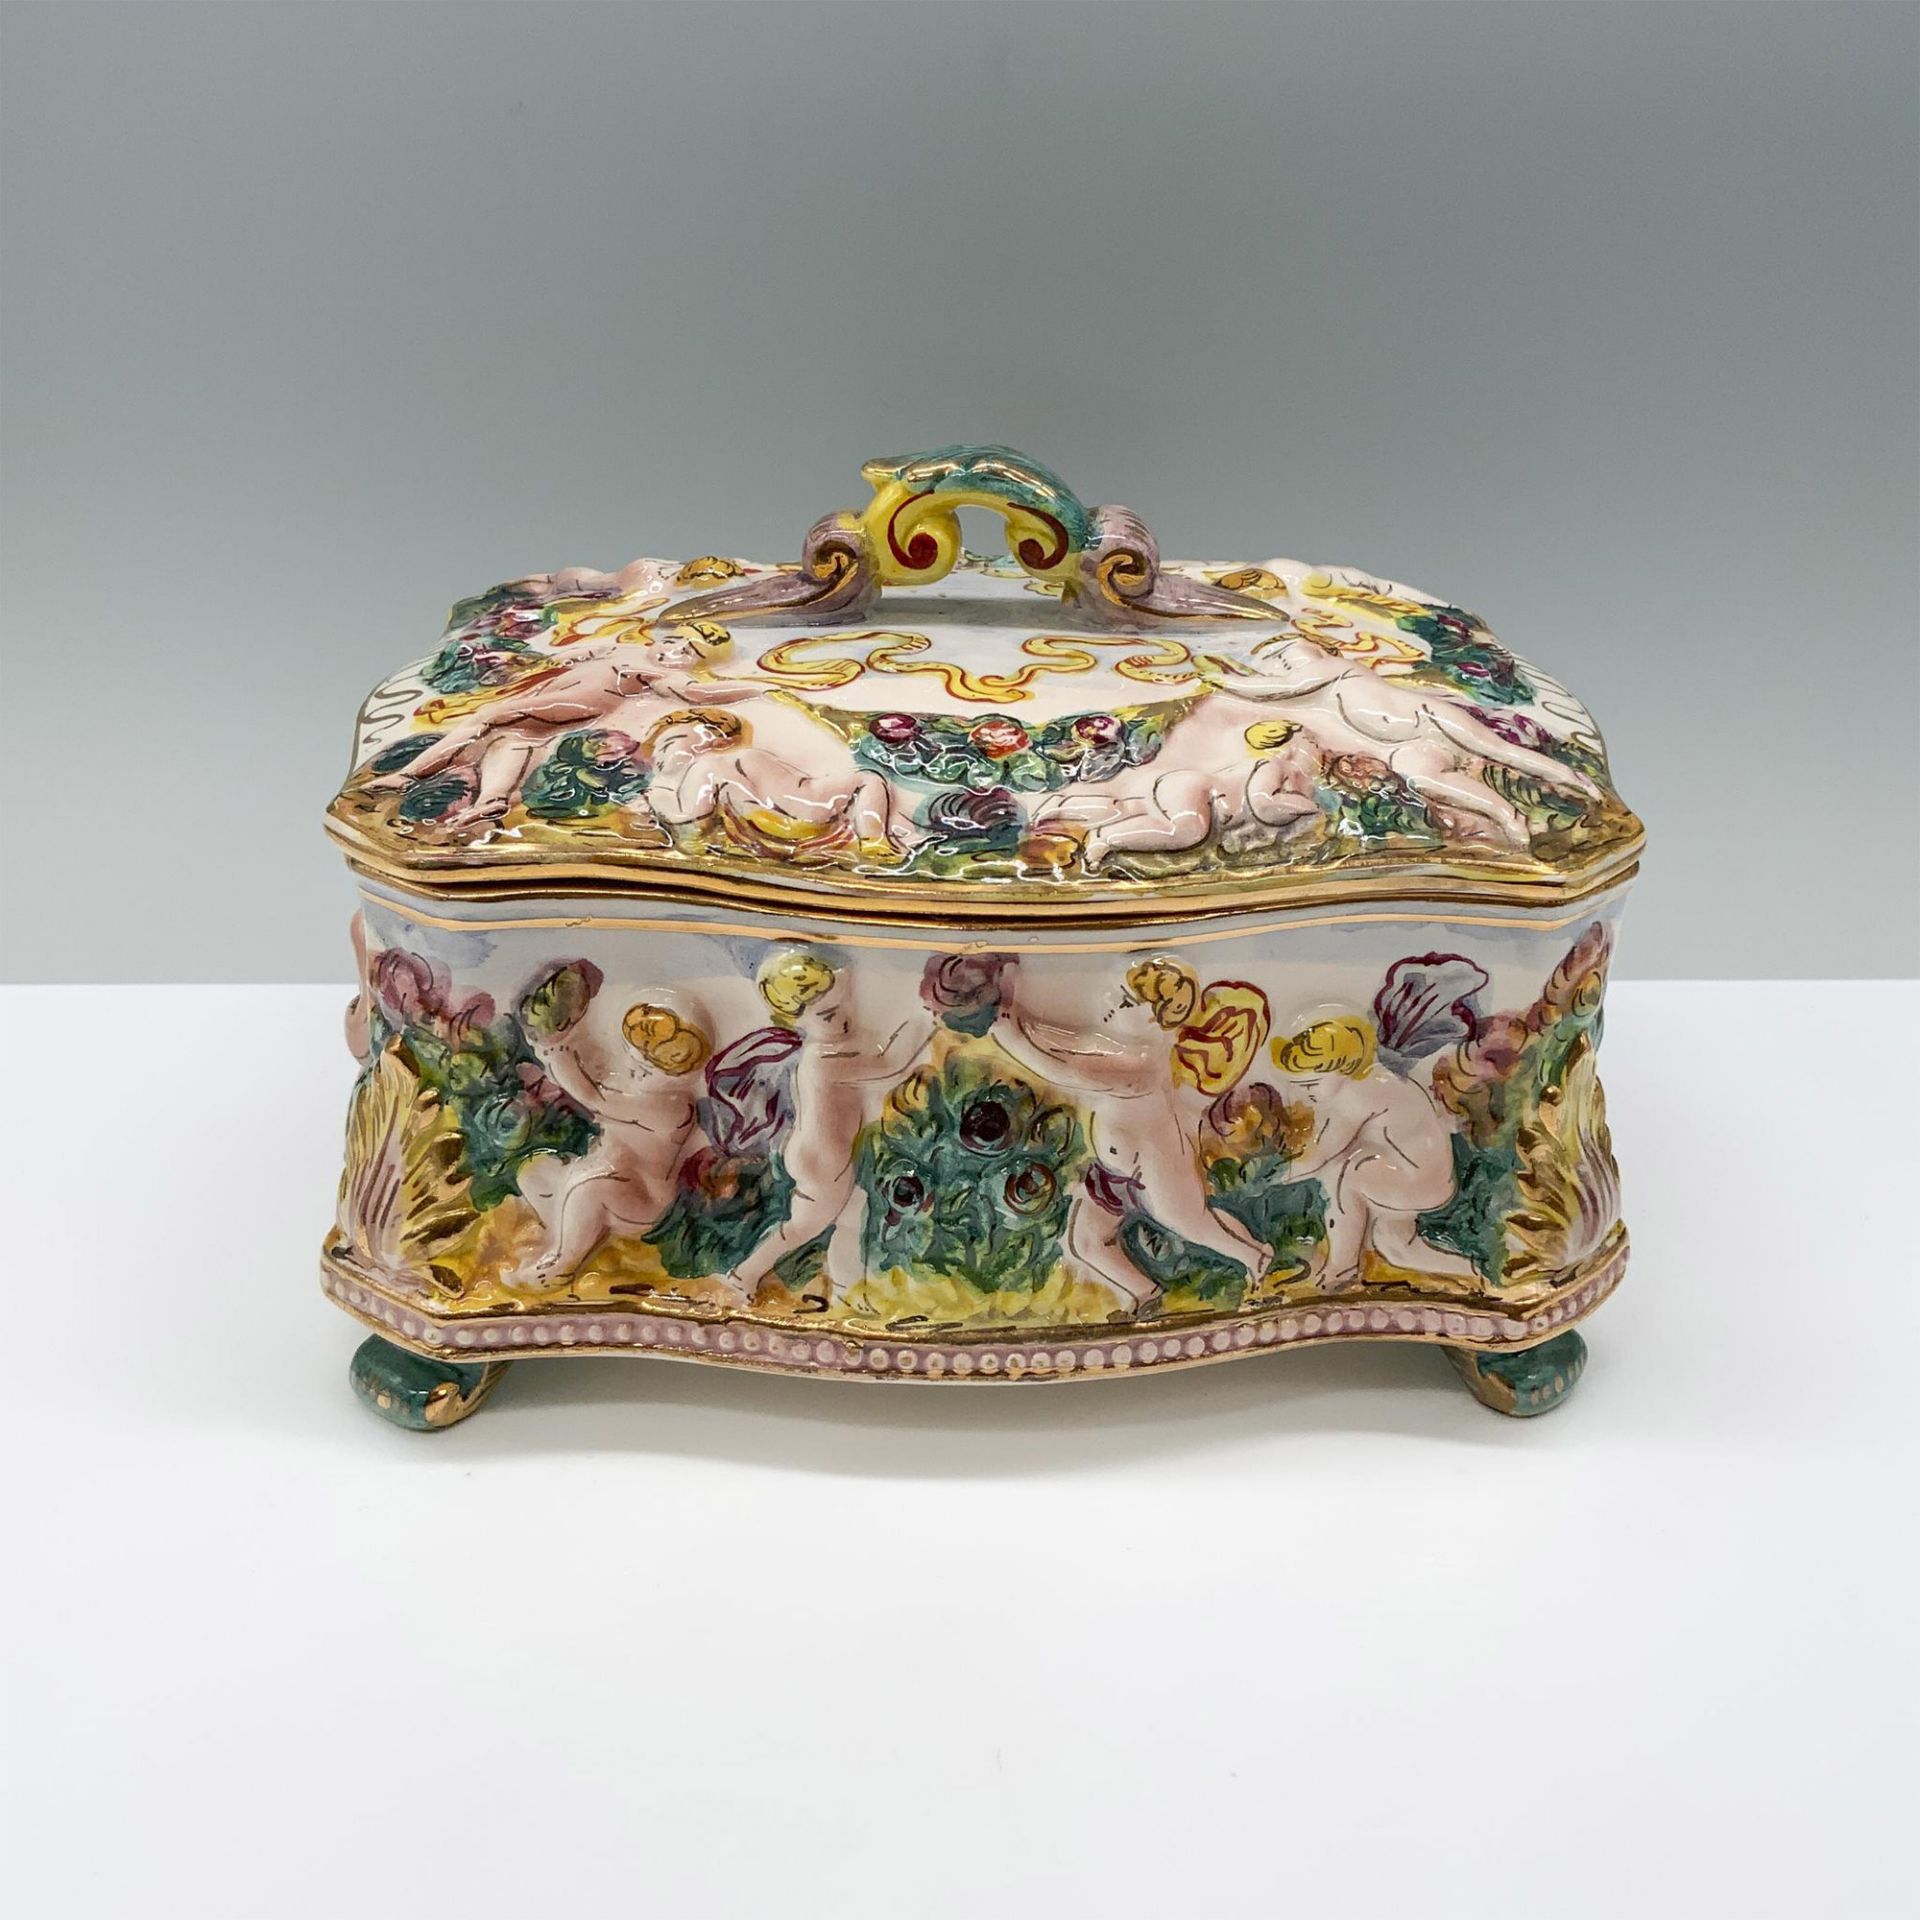 Capodimonte Porcelain Covered Box - Image 2 of 3